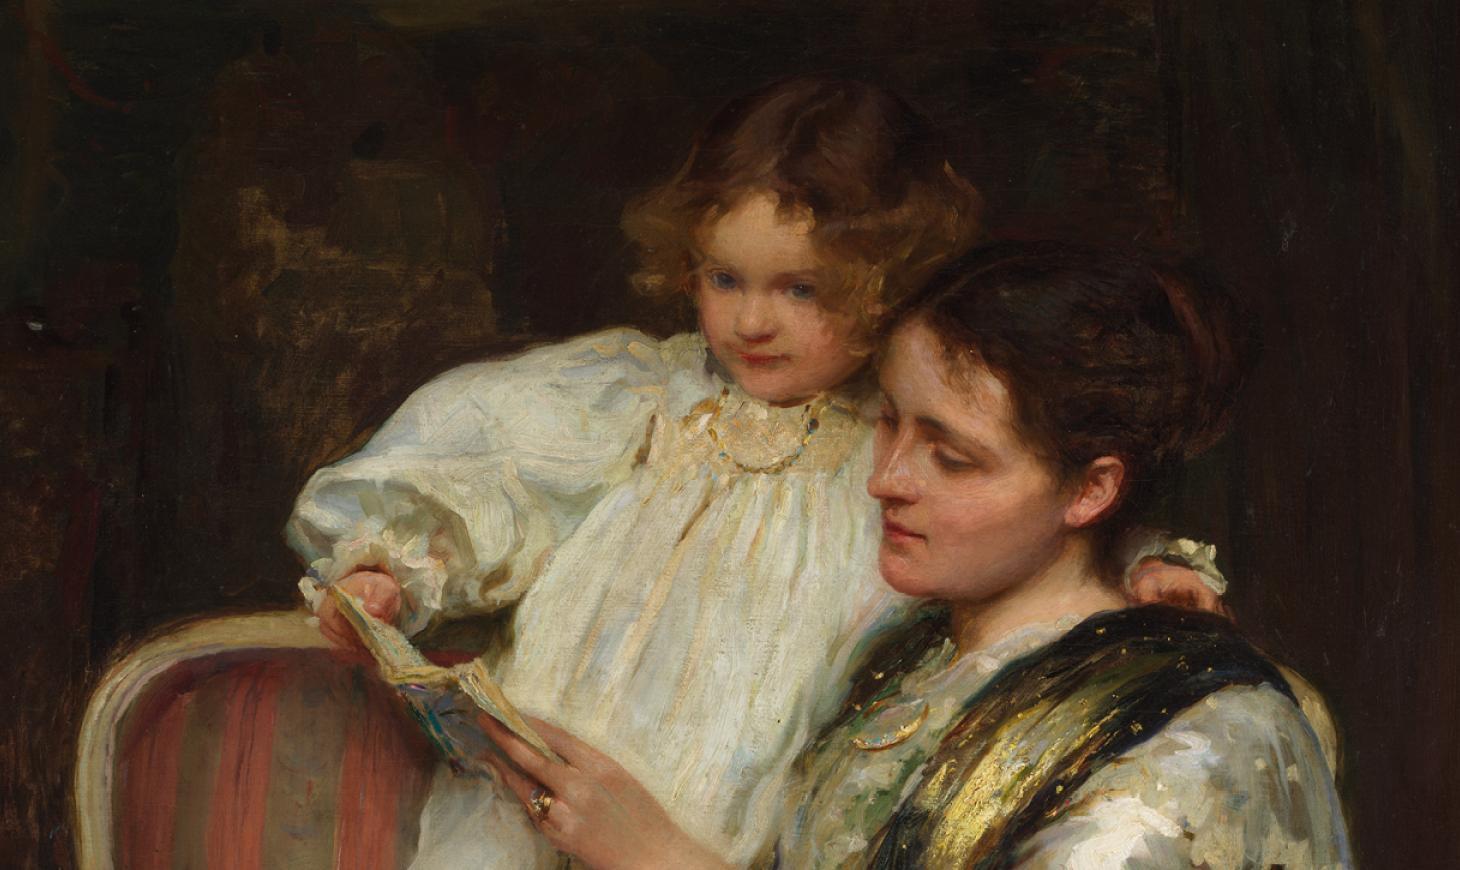 A detail from an oil painting of a woman and a young child reading together.